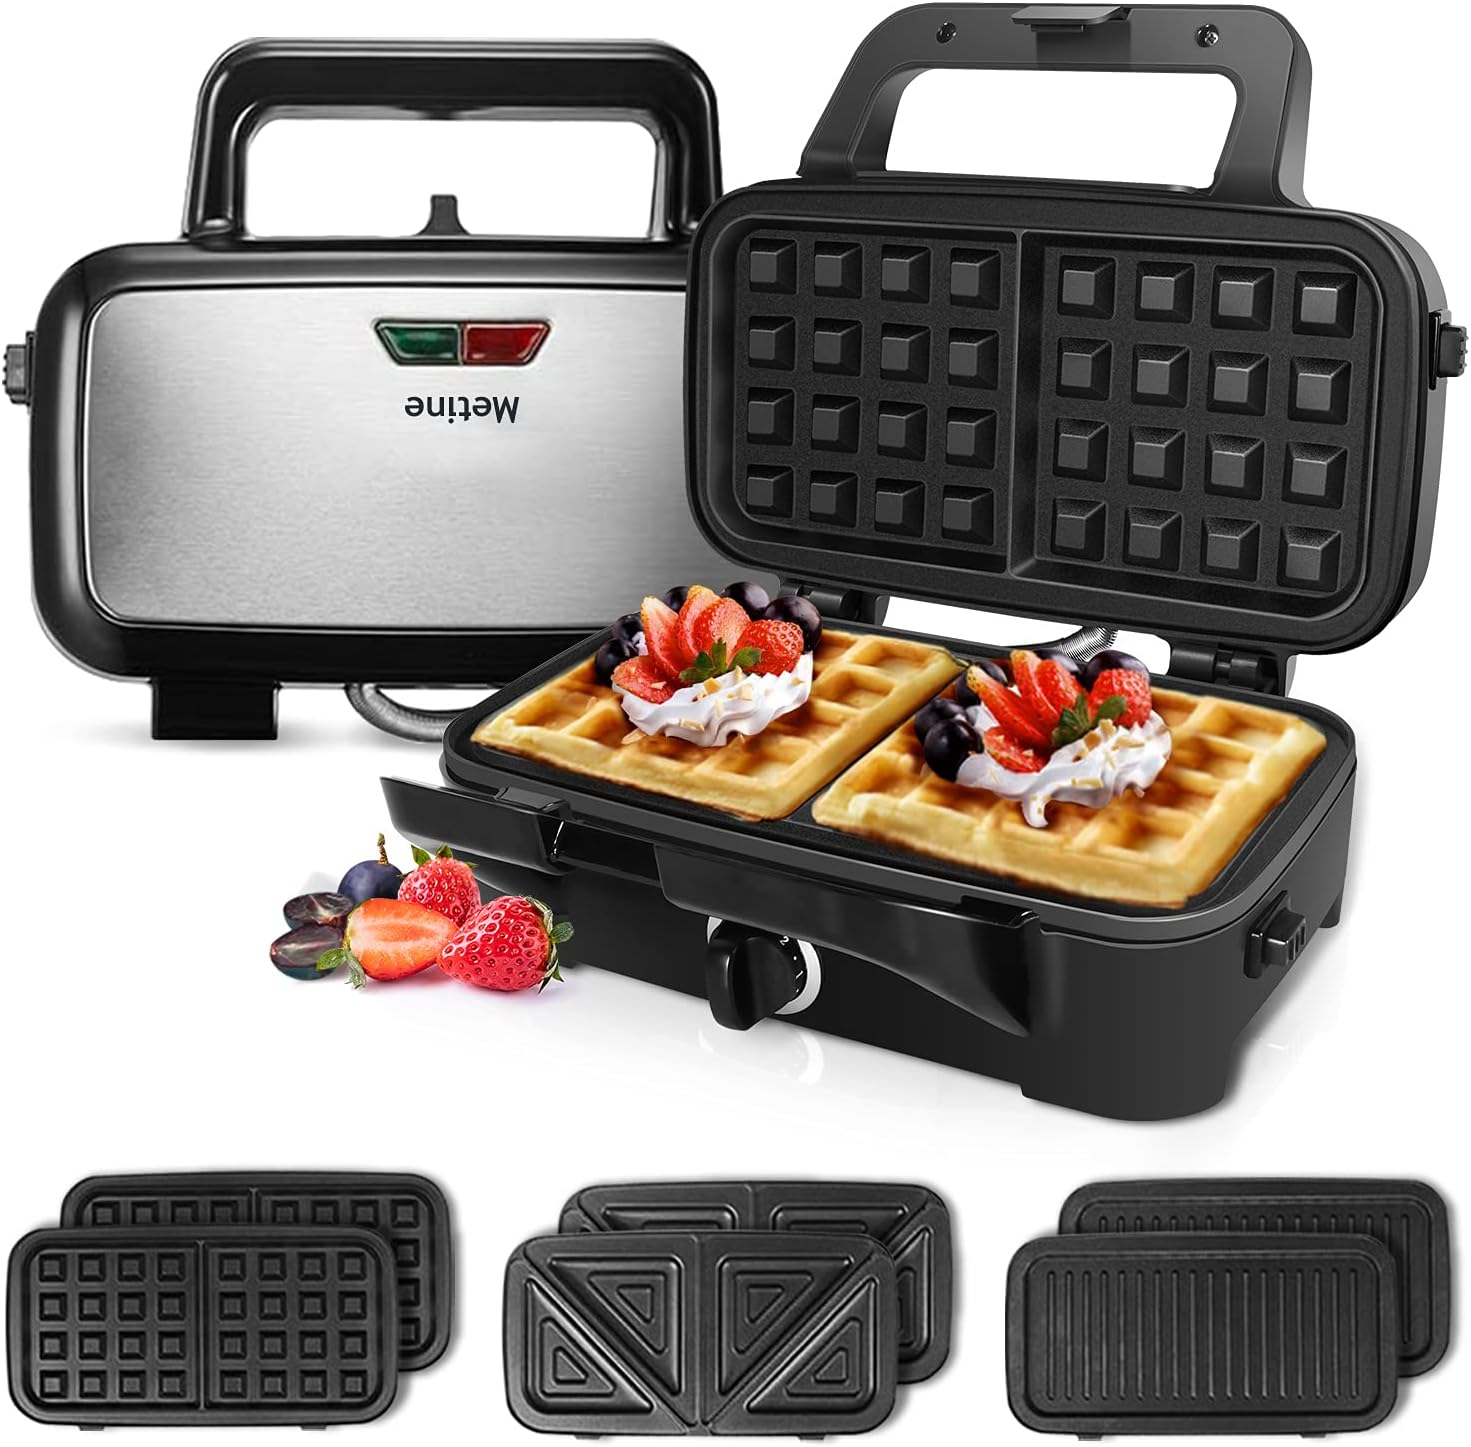 Metine Waffle Makers, 3-in-1 Waffle Iron Panini Press Sandwich Maker with Removable Plates, 5-gears Temperature Control Non Stick Coating Cool Touch Handle Anti-skid Feet for Breakfast 1200W 120V